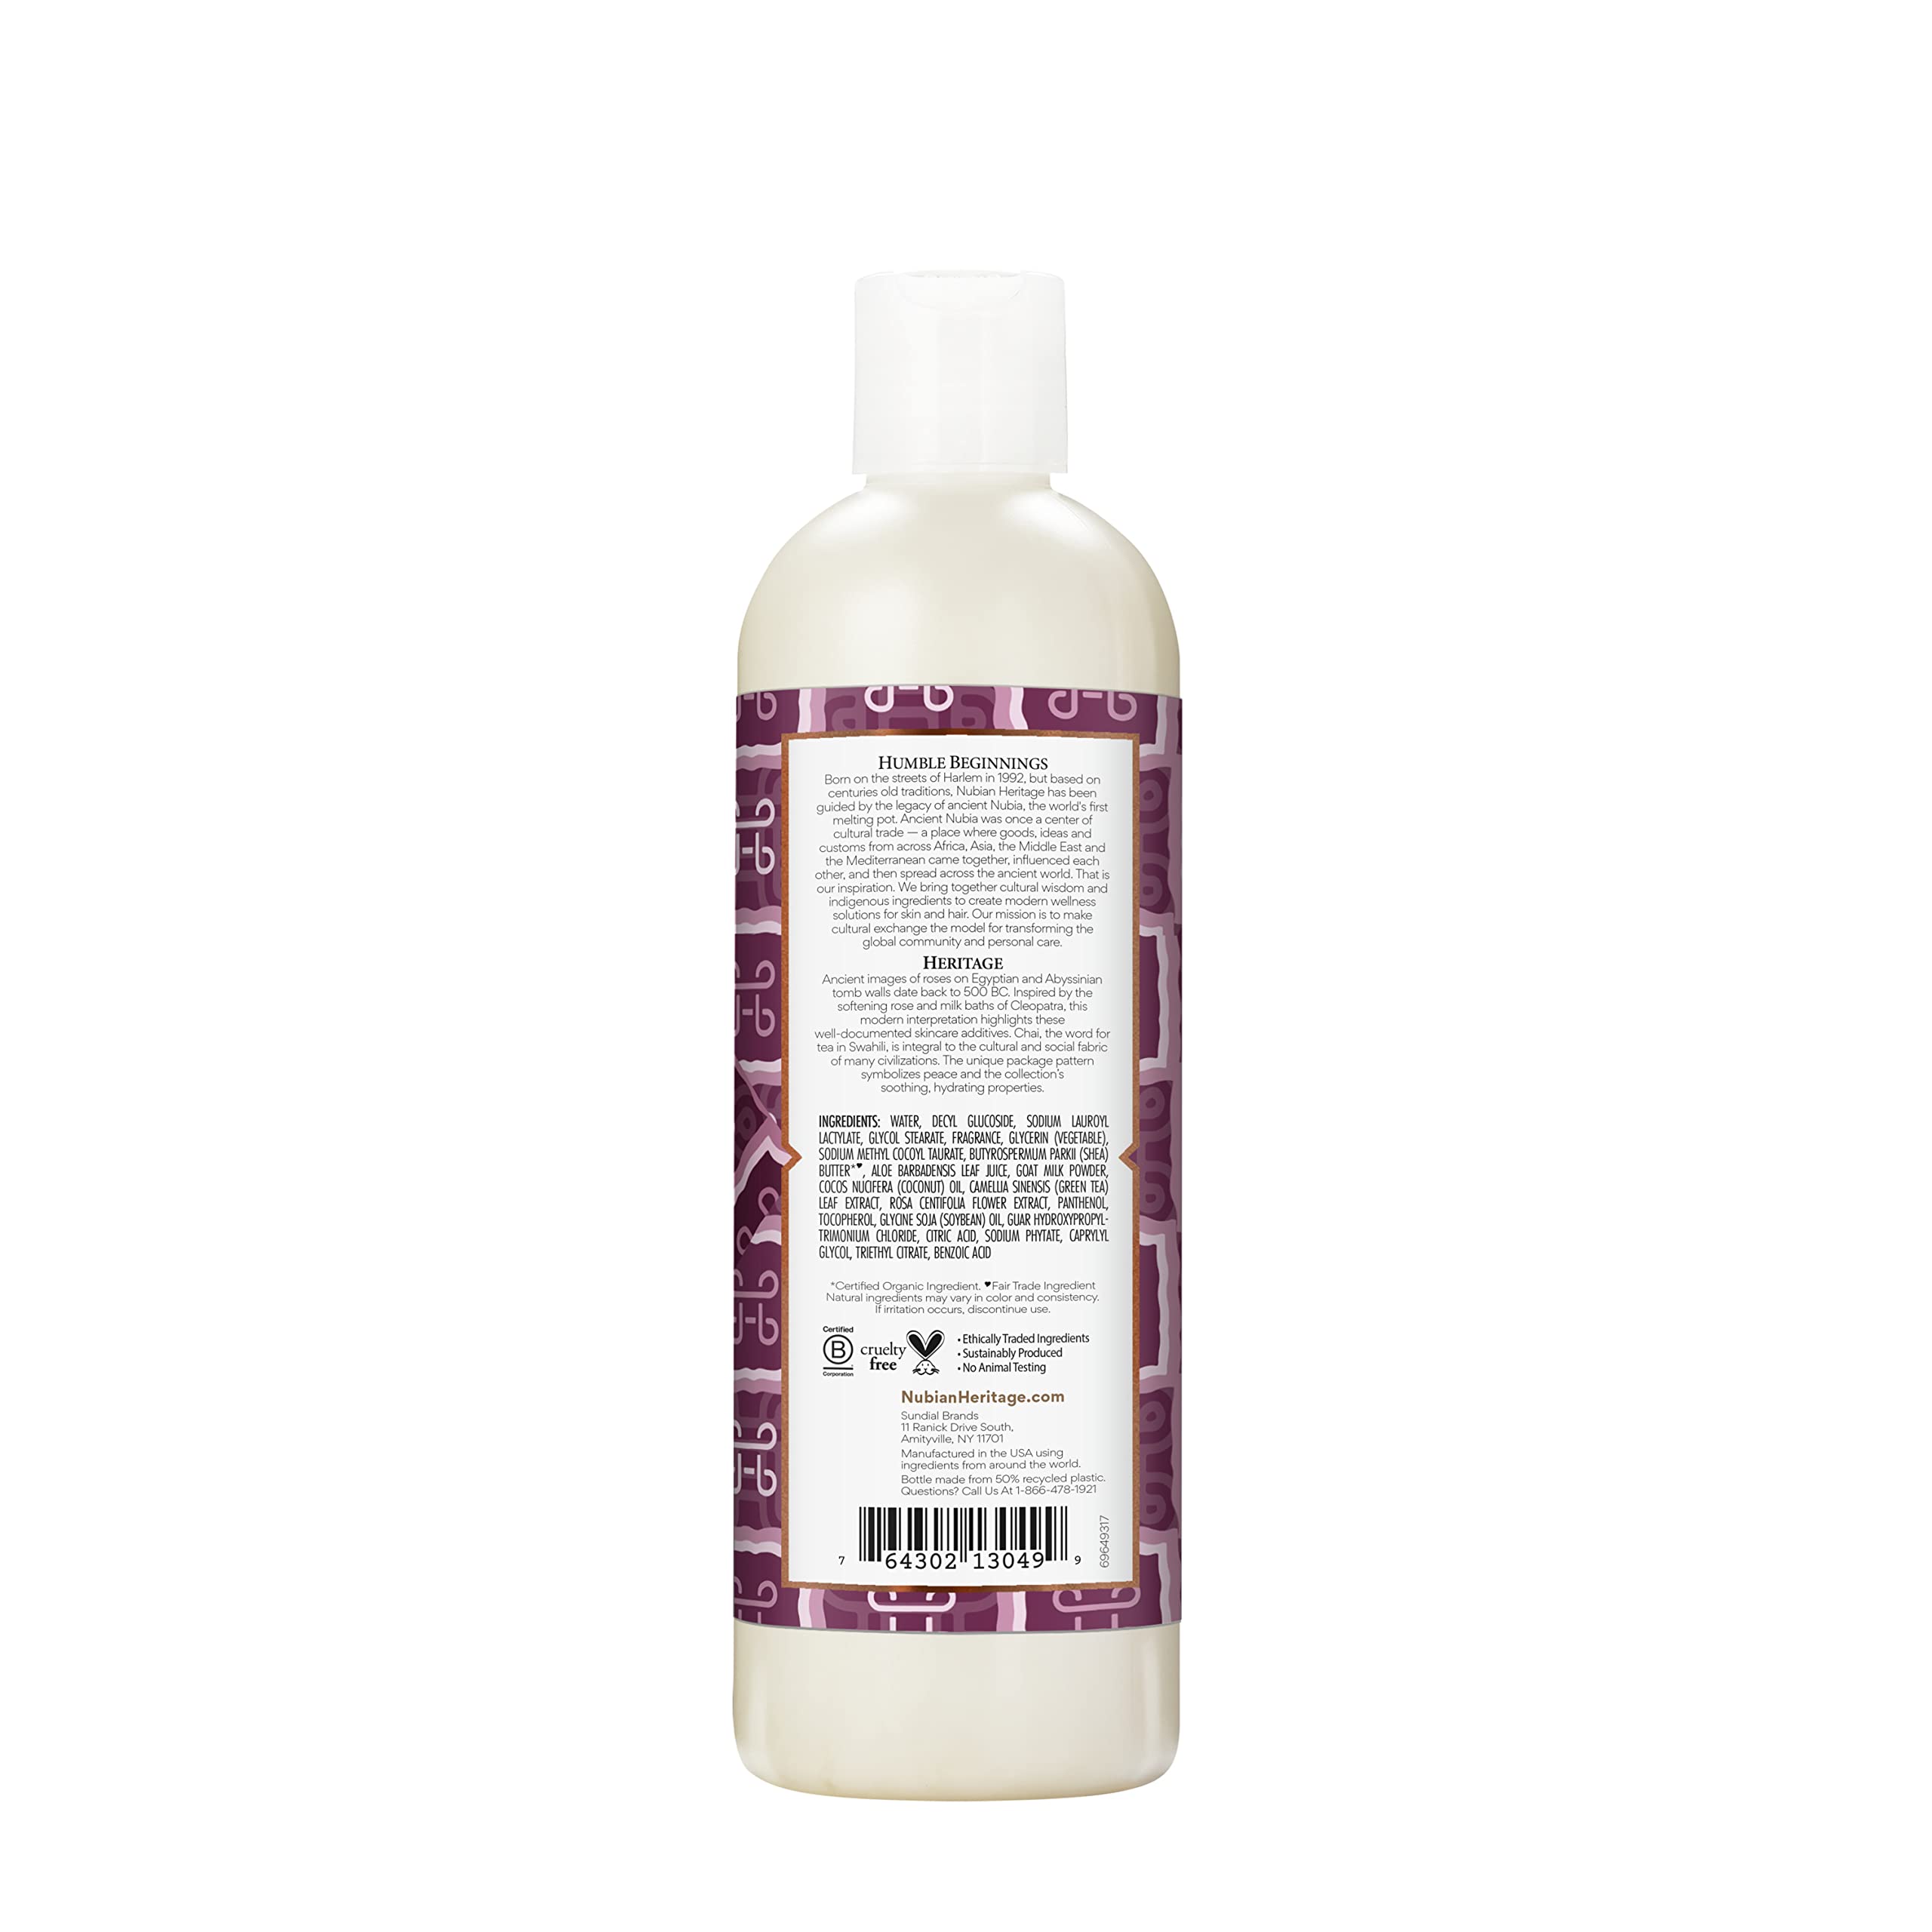 Nubian Heritage Body Wash Goats Milk and Chai Soothing & Hydrating Body Cleanser Made with Fair Trade Shea Butter, 13 oz